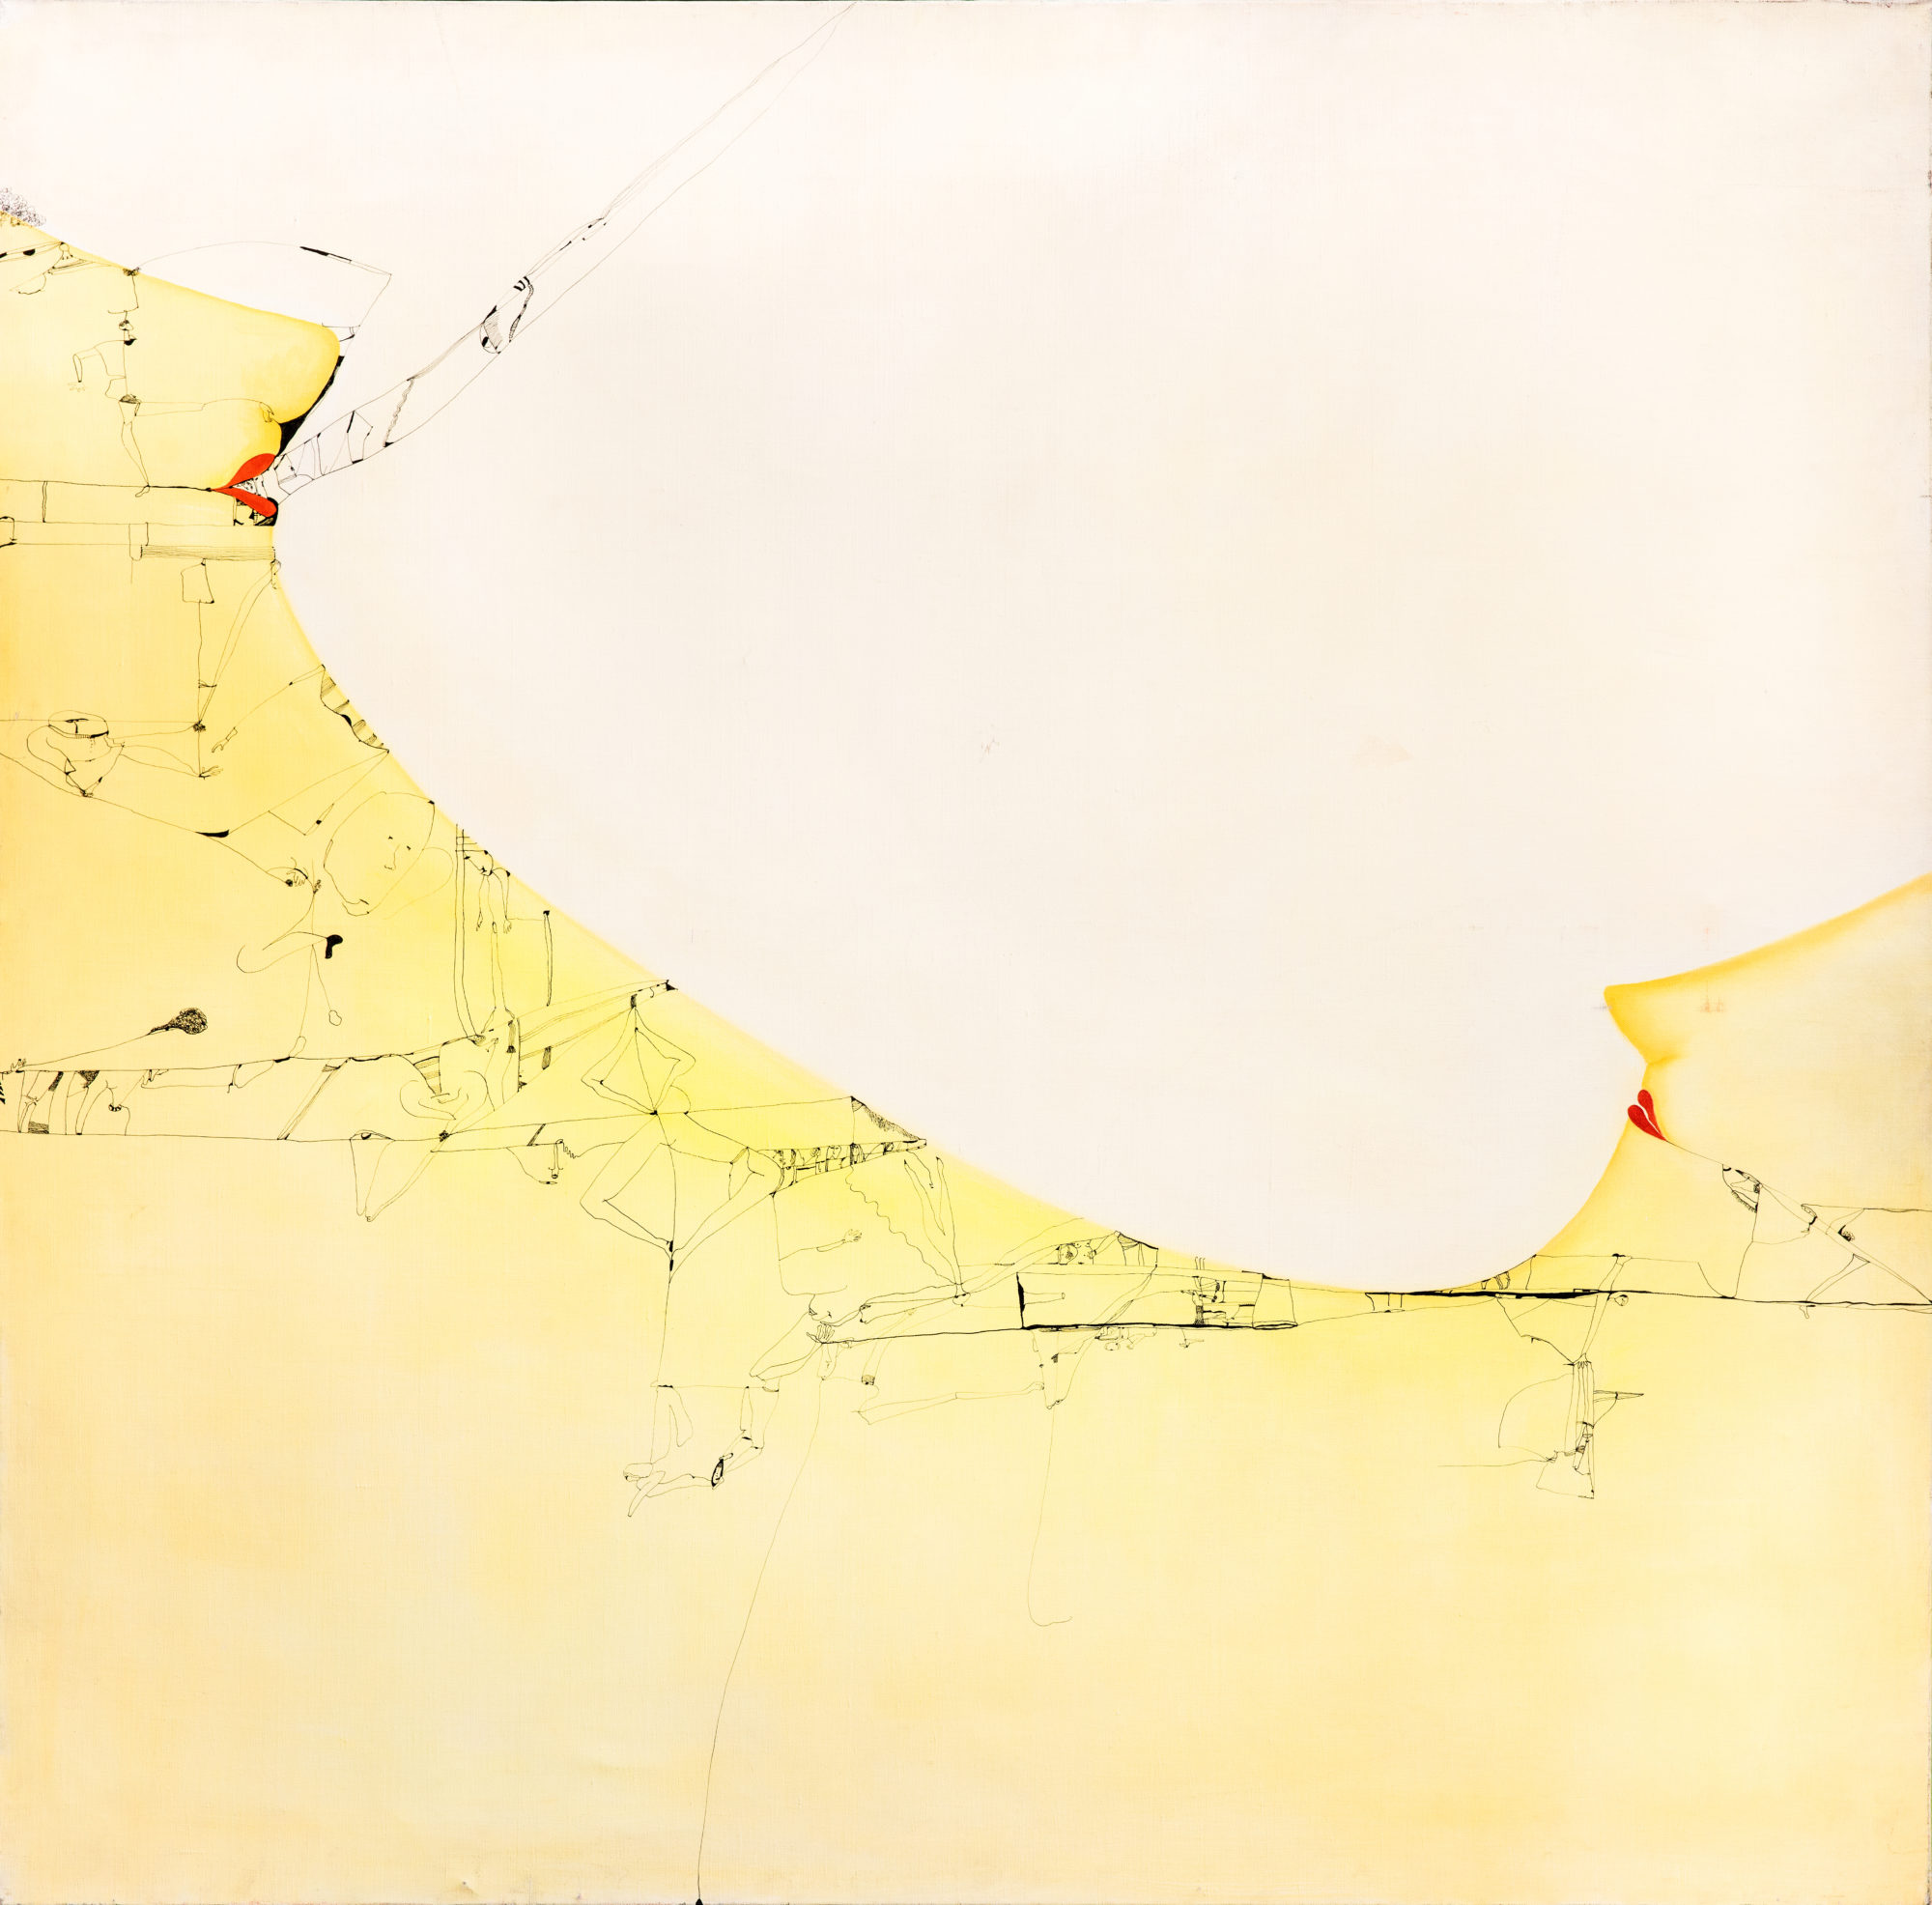 sketch drawing of a yellow slope shape with fine black details on a white background.